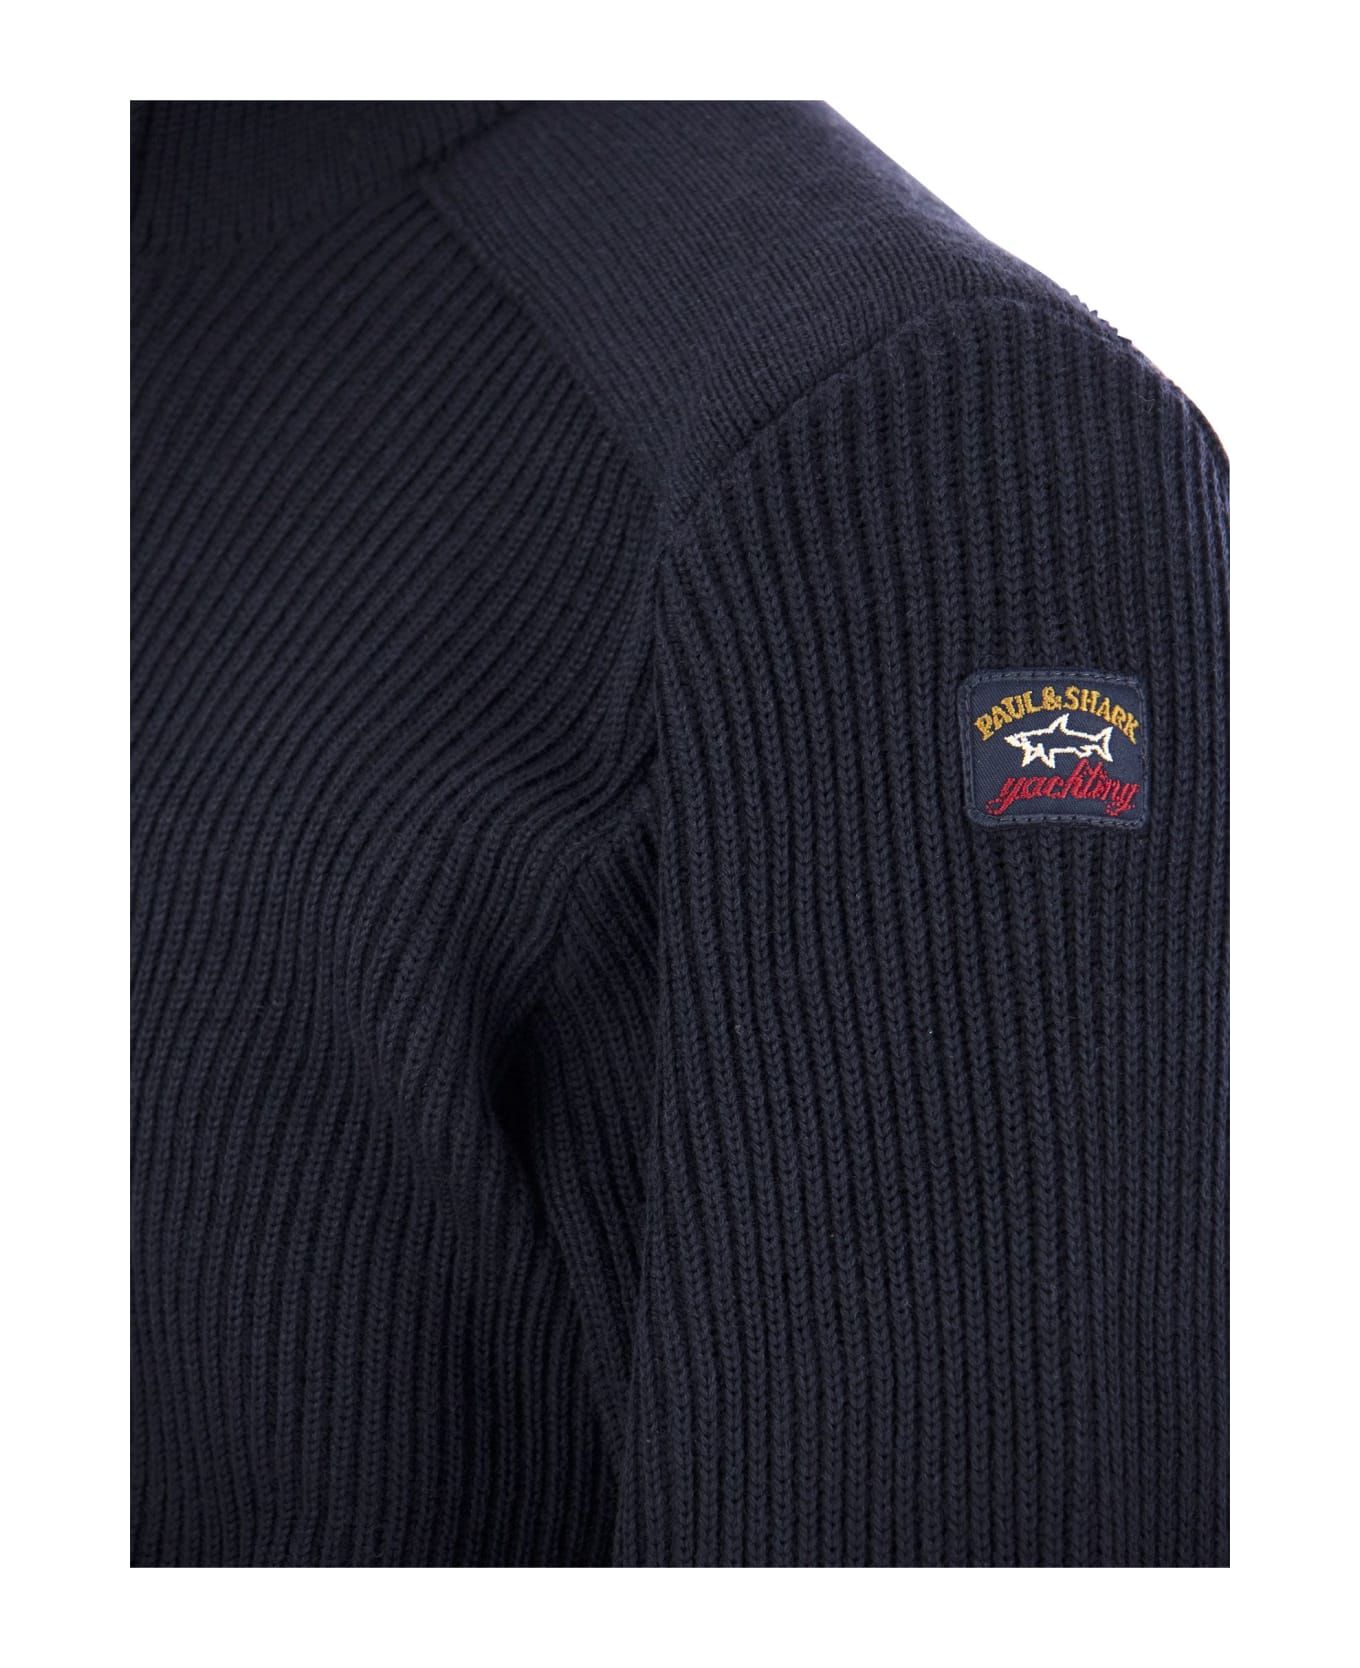 Paul&Shark Wool Cardigan With Zip And Iconic Badge - Navy